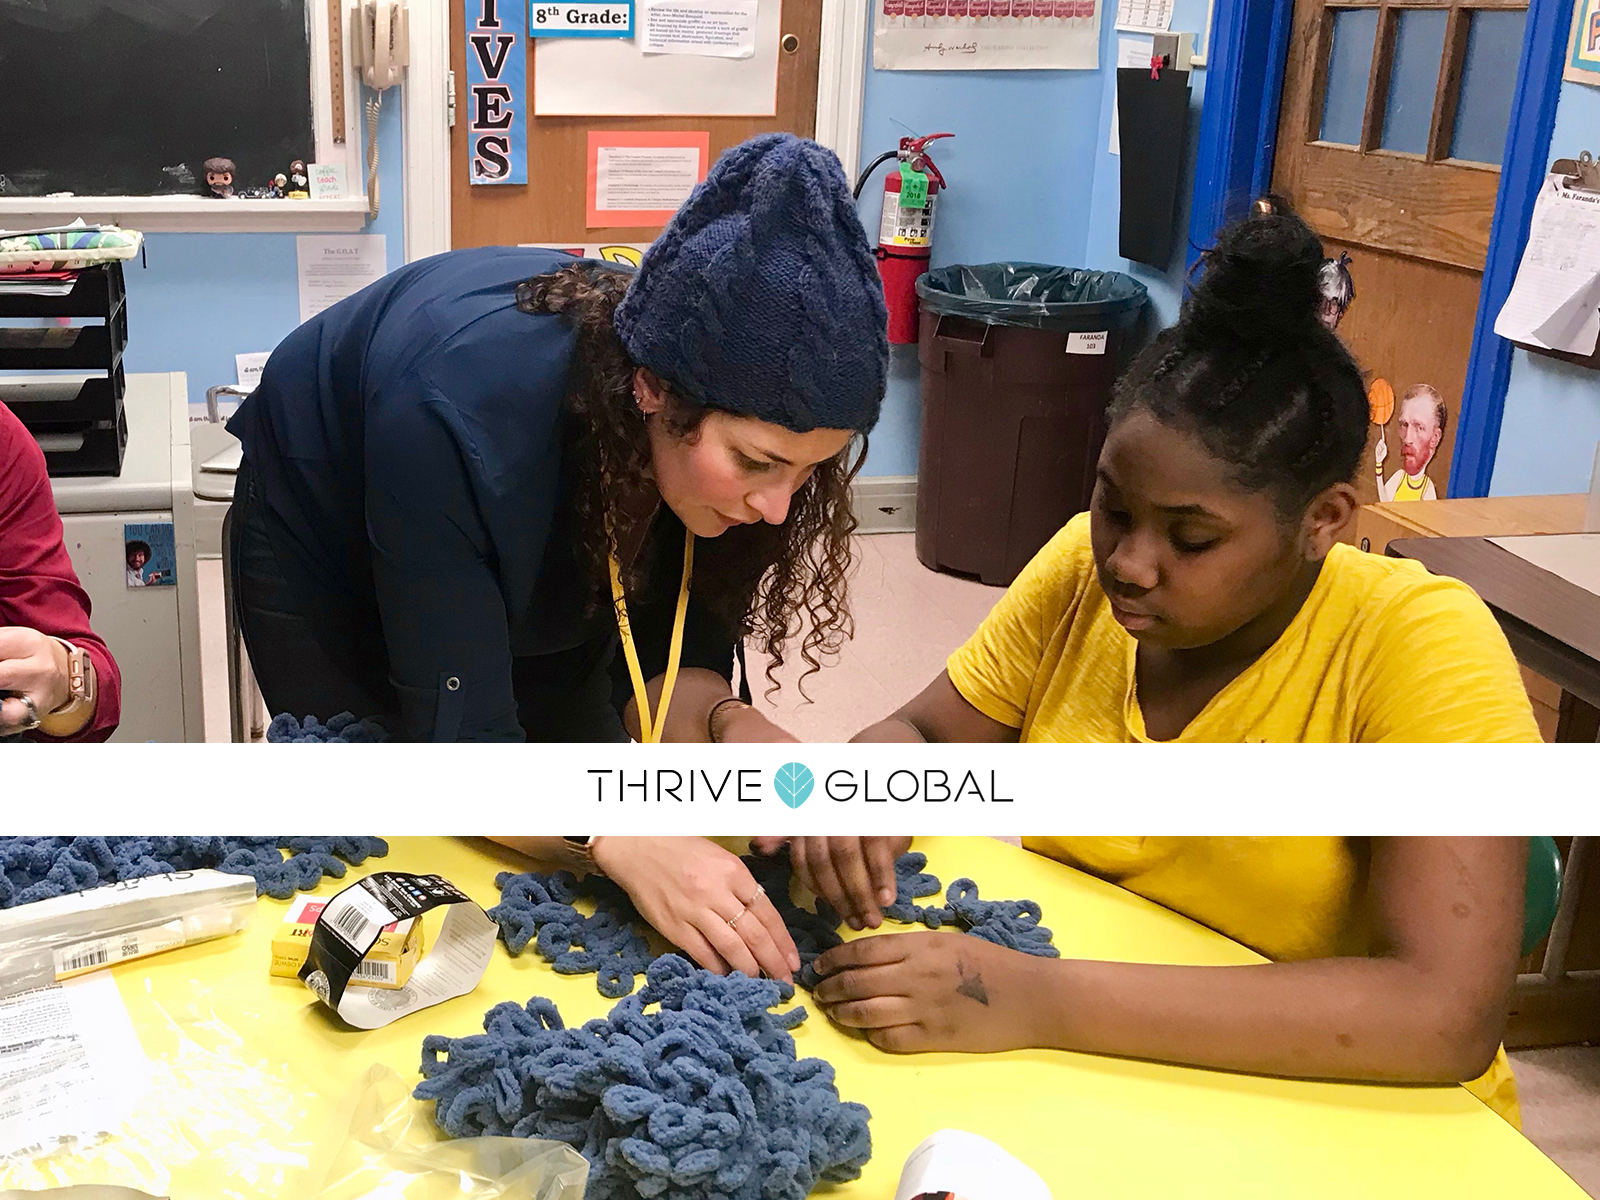 Thrive Global logo overlaid on image of Shira helping a student knit